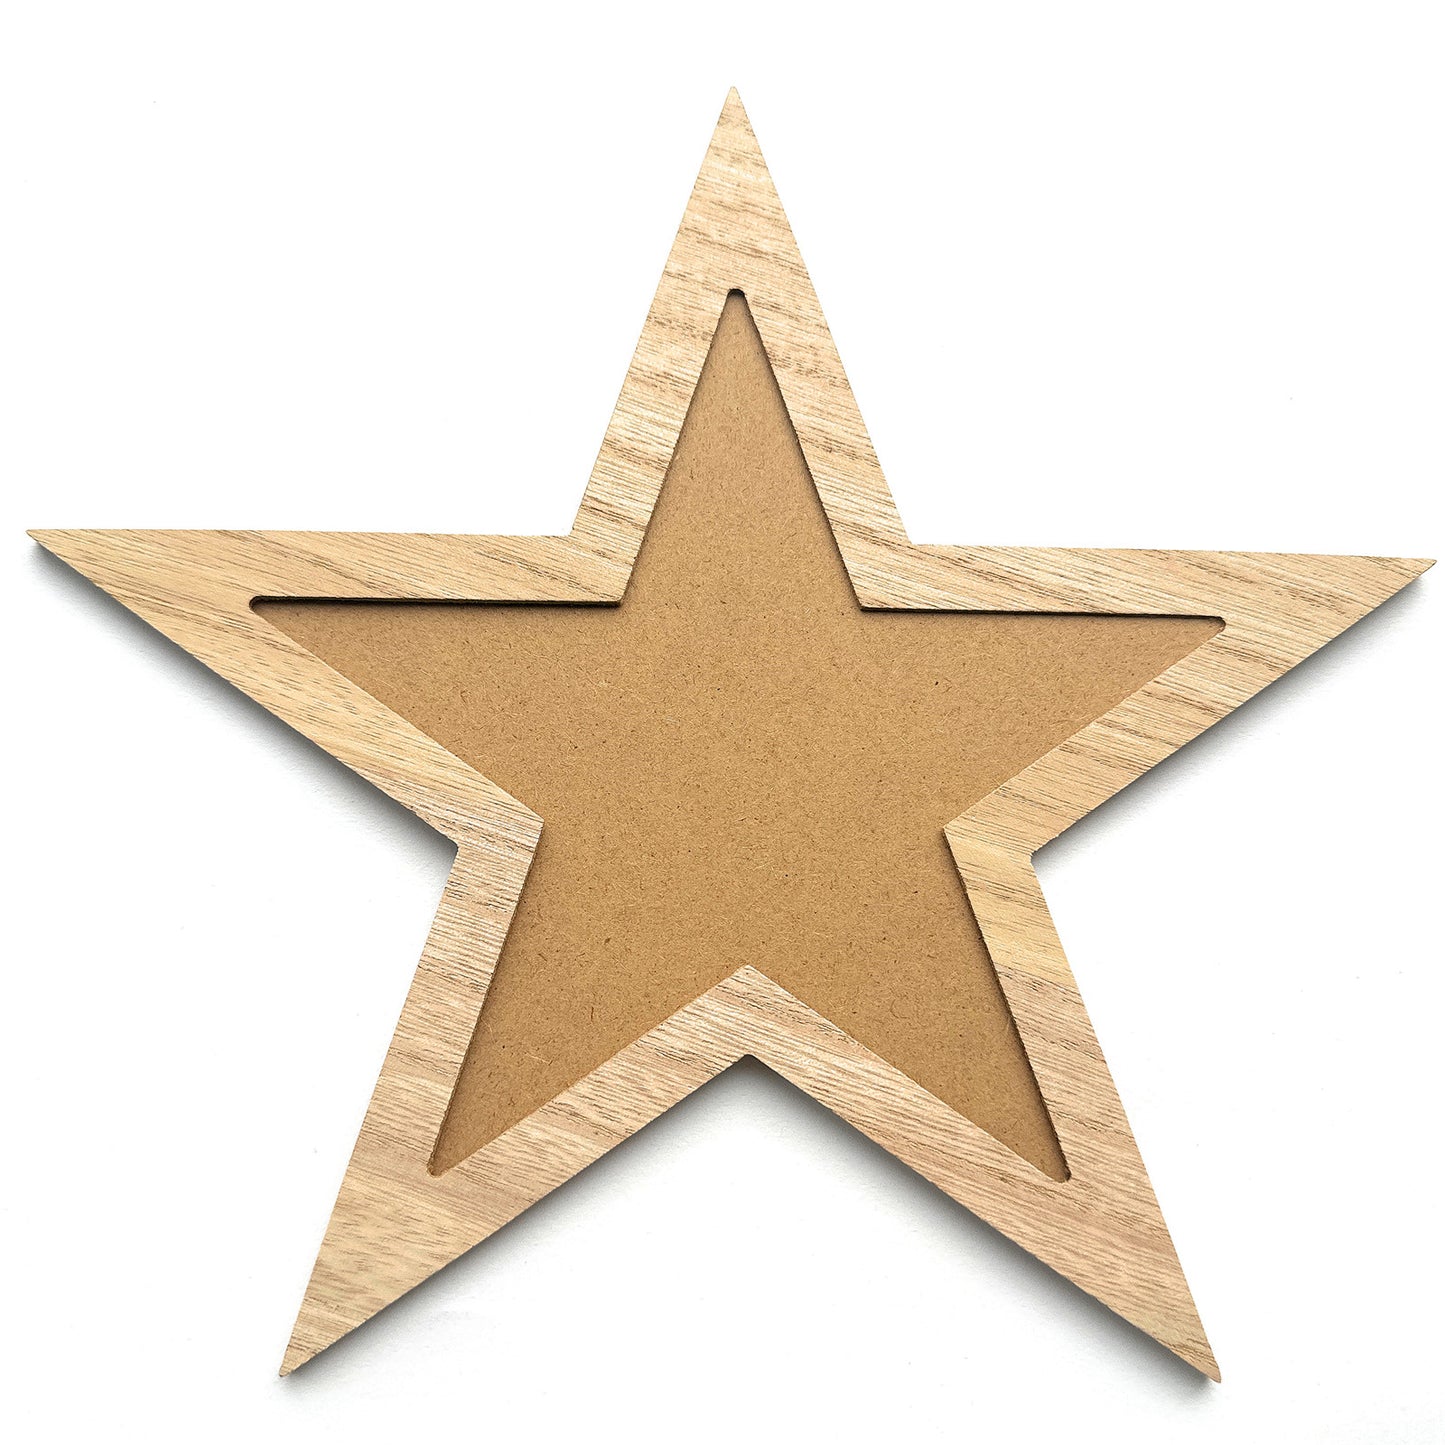 GiveMOJO 10'' x 10'' Star Shaped Wooden Photo Frame - Home Decorating Star Shape Craft Picture Frame